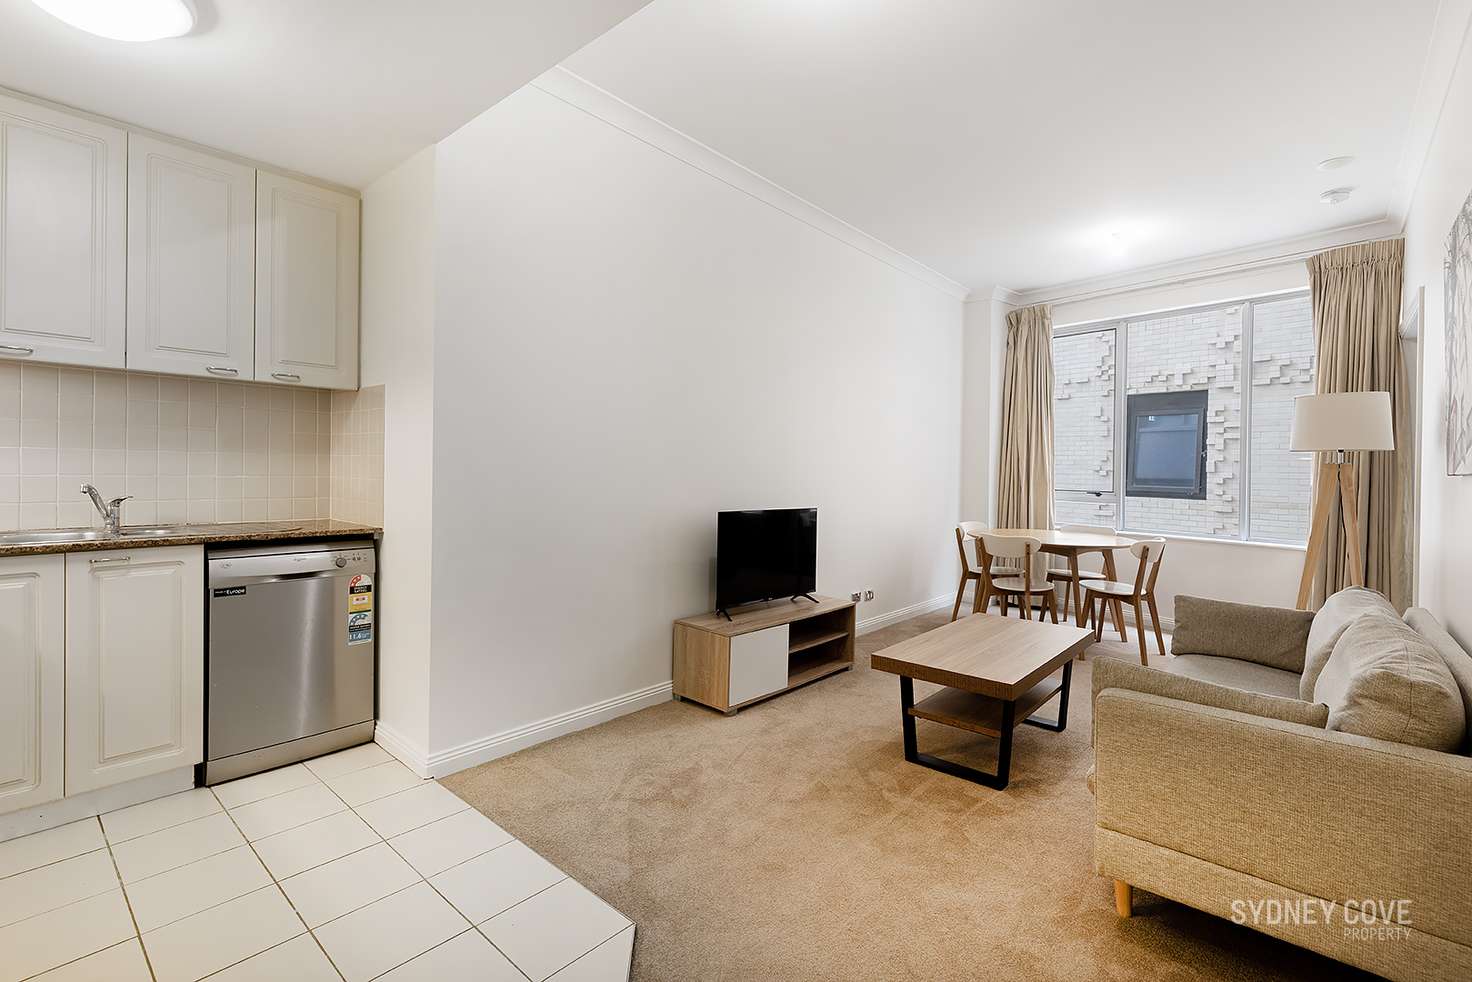 Main view of Homely apartment listing, 38 Bridge Street, Sydney NSW 2000